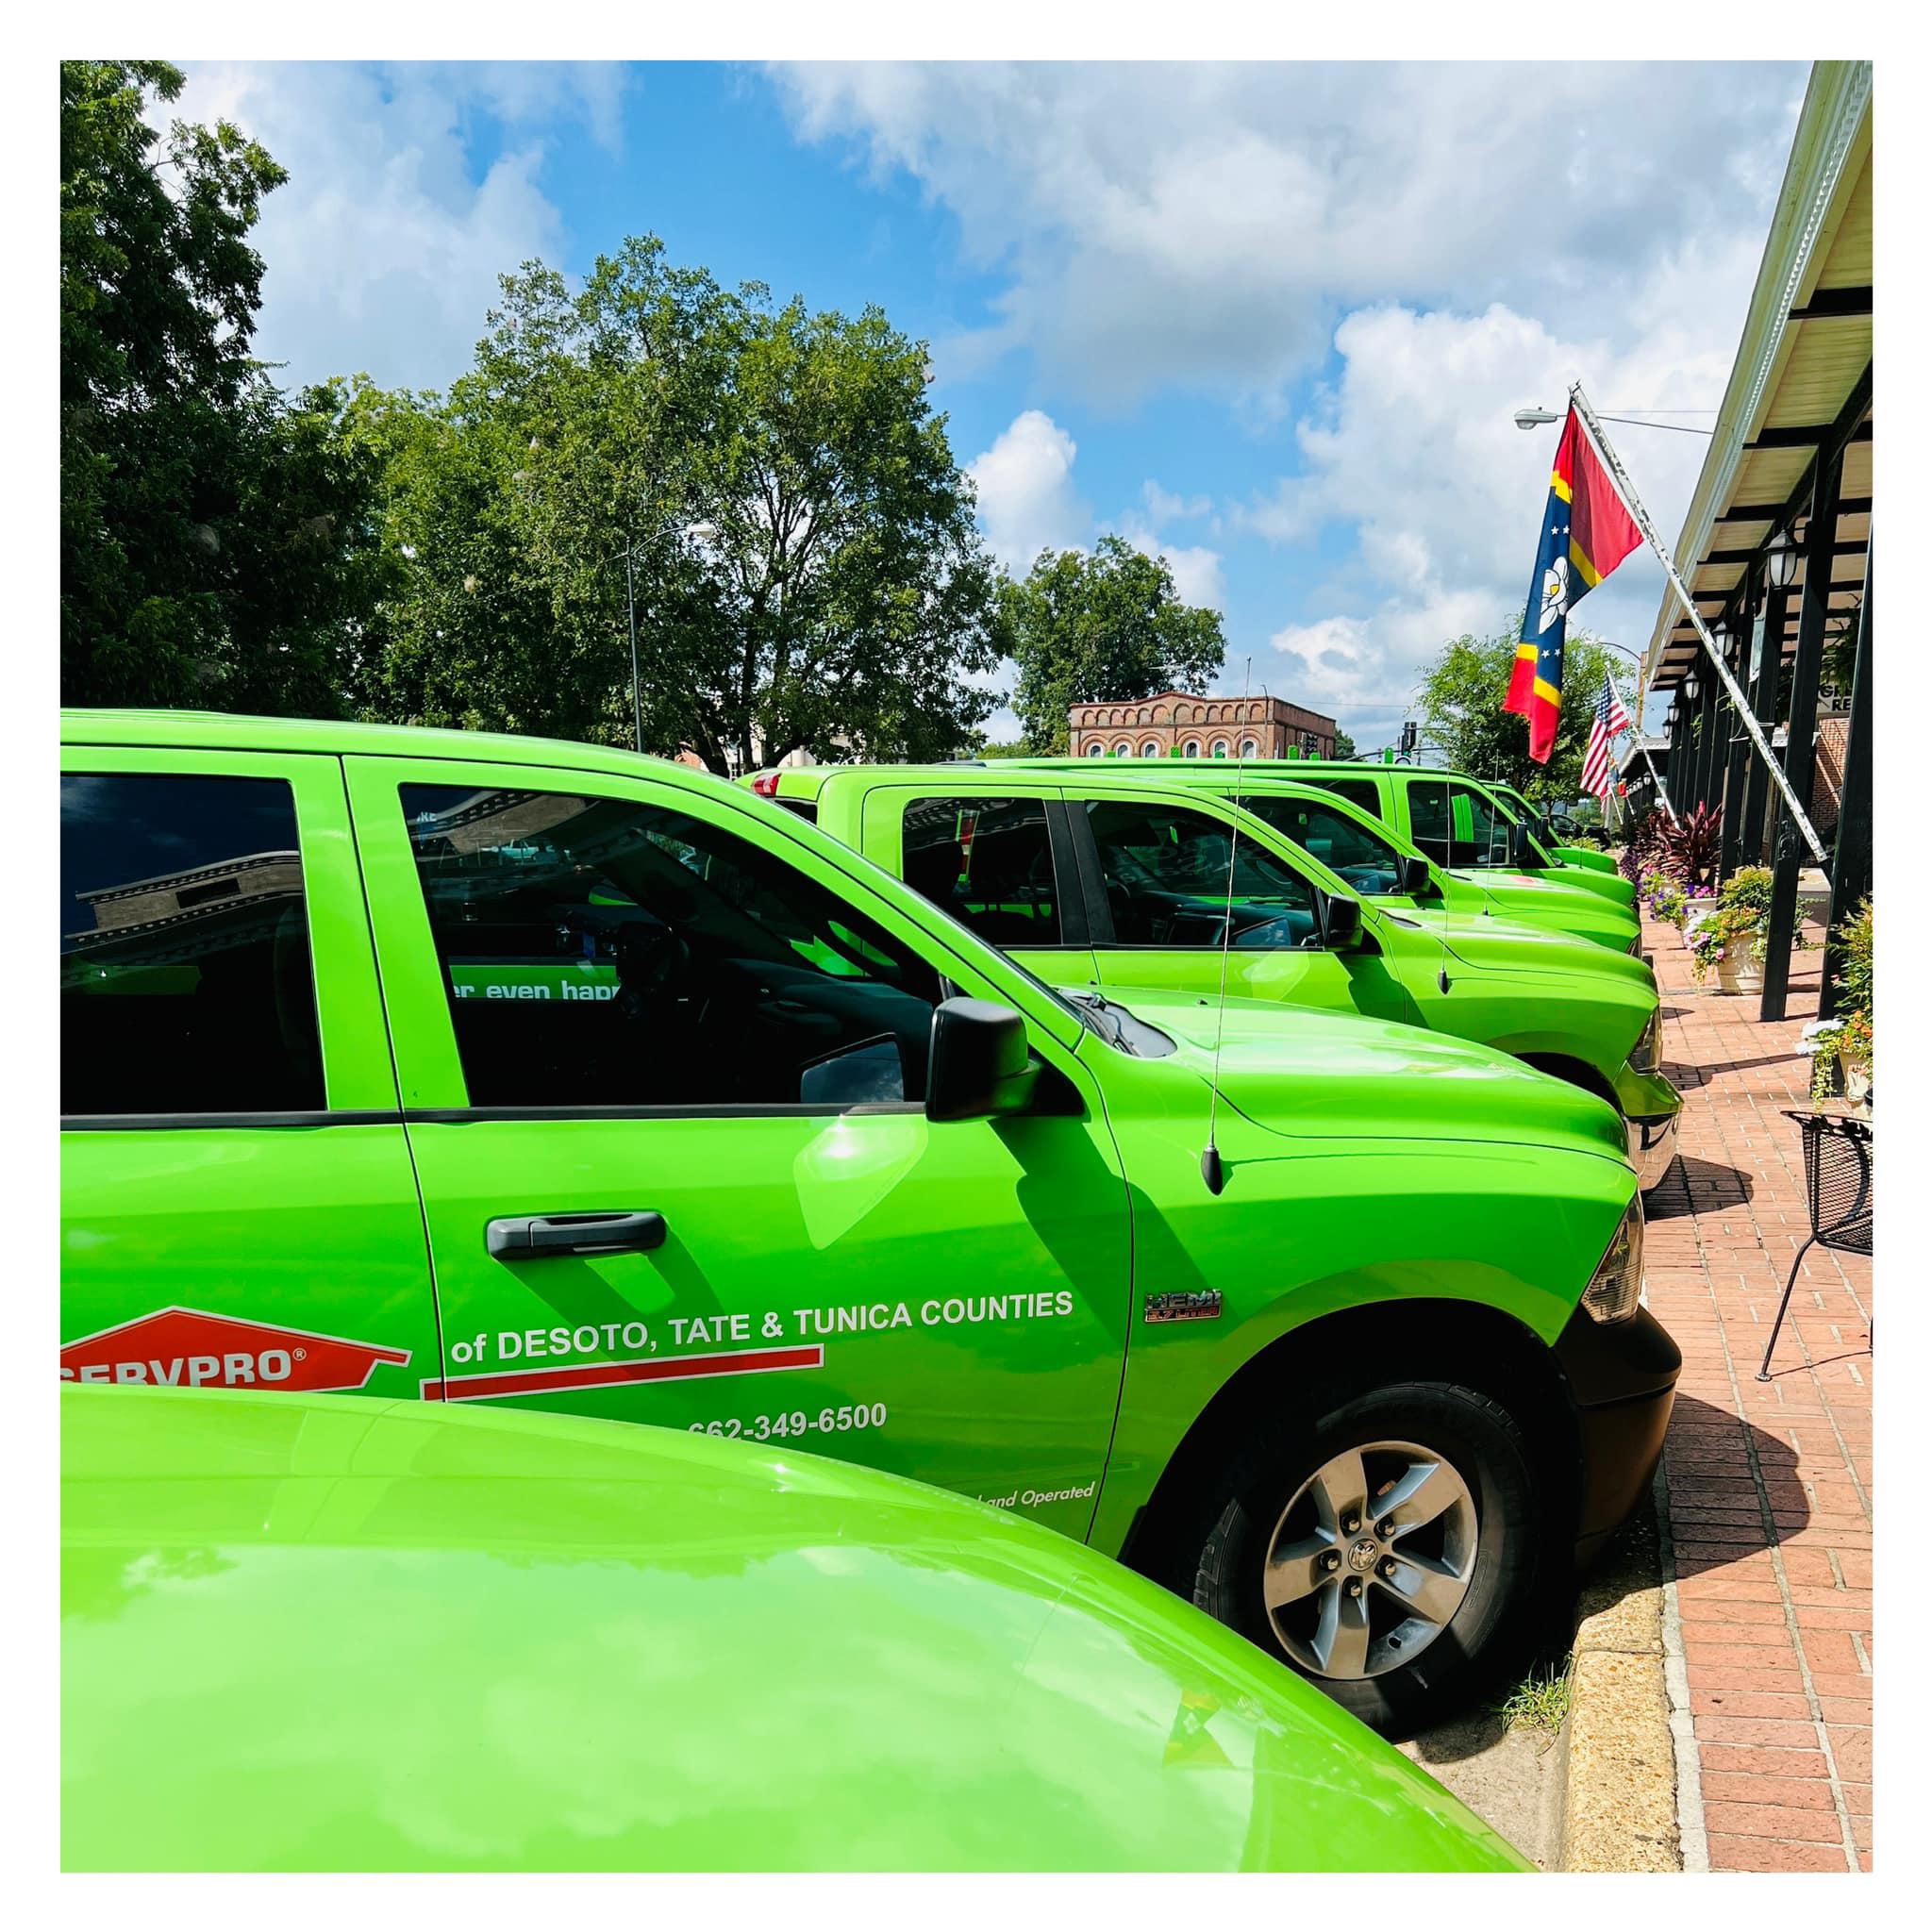 SERVPRO vehicles in downtown DeSoto county.